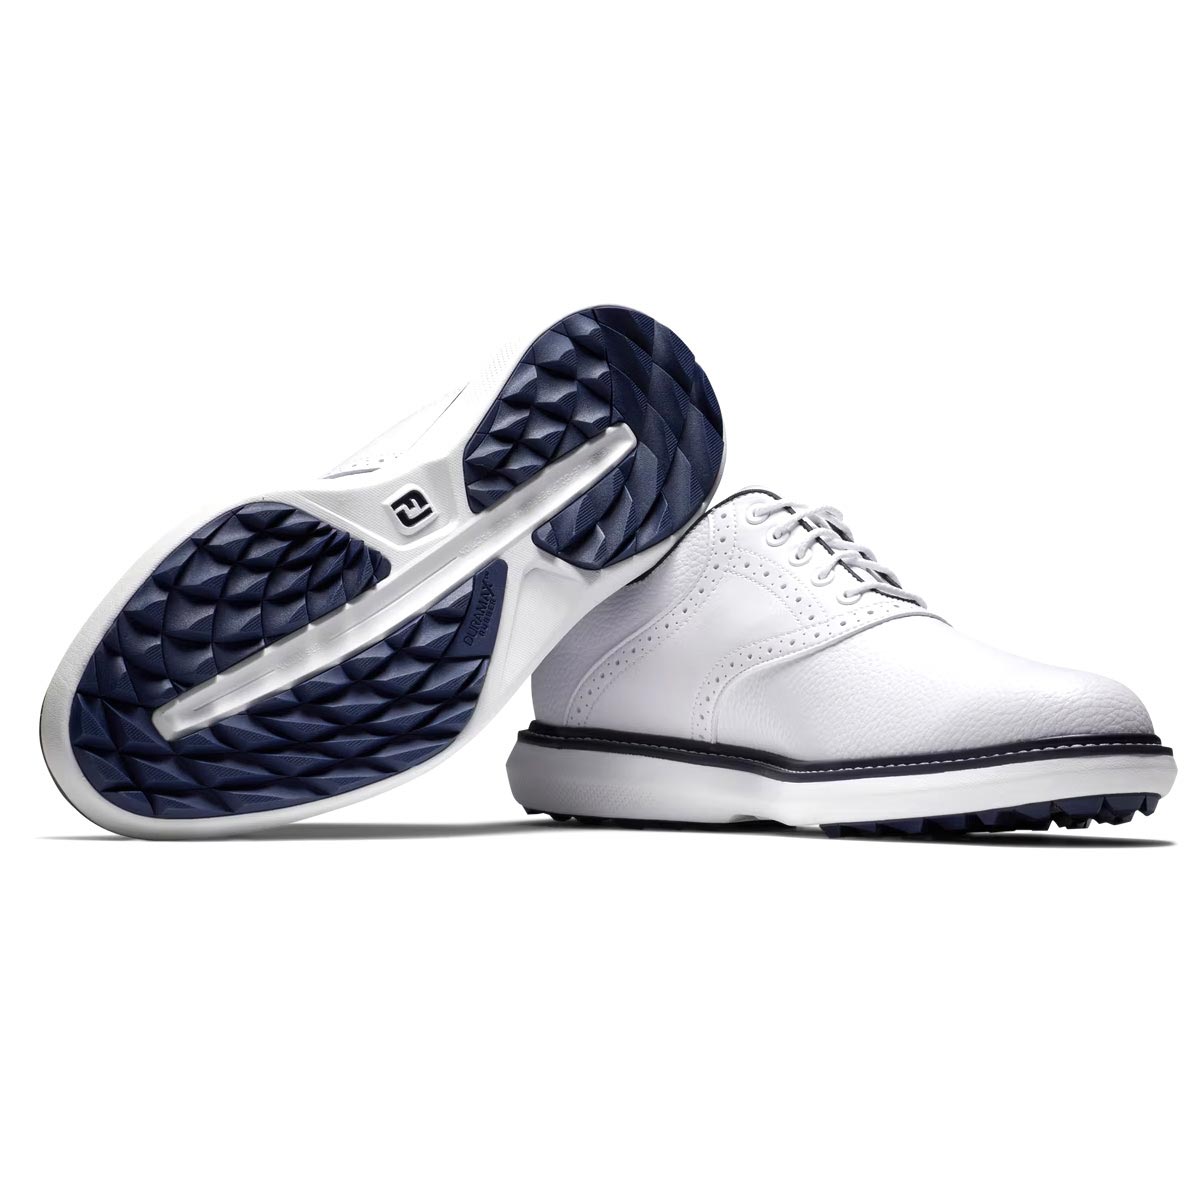 FOOTJOY TRADITIONS SPIKELESS SADDLE WHITE MENS GOLF SHOES